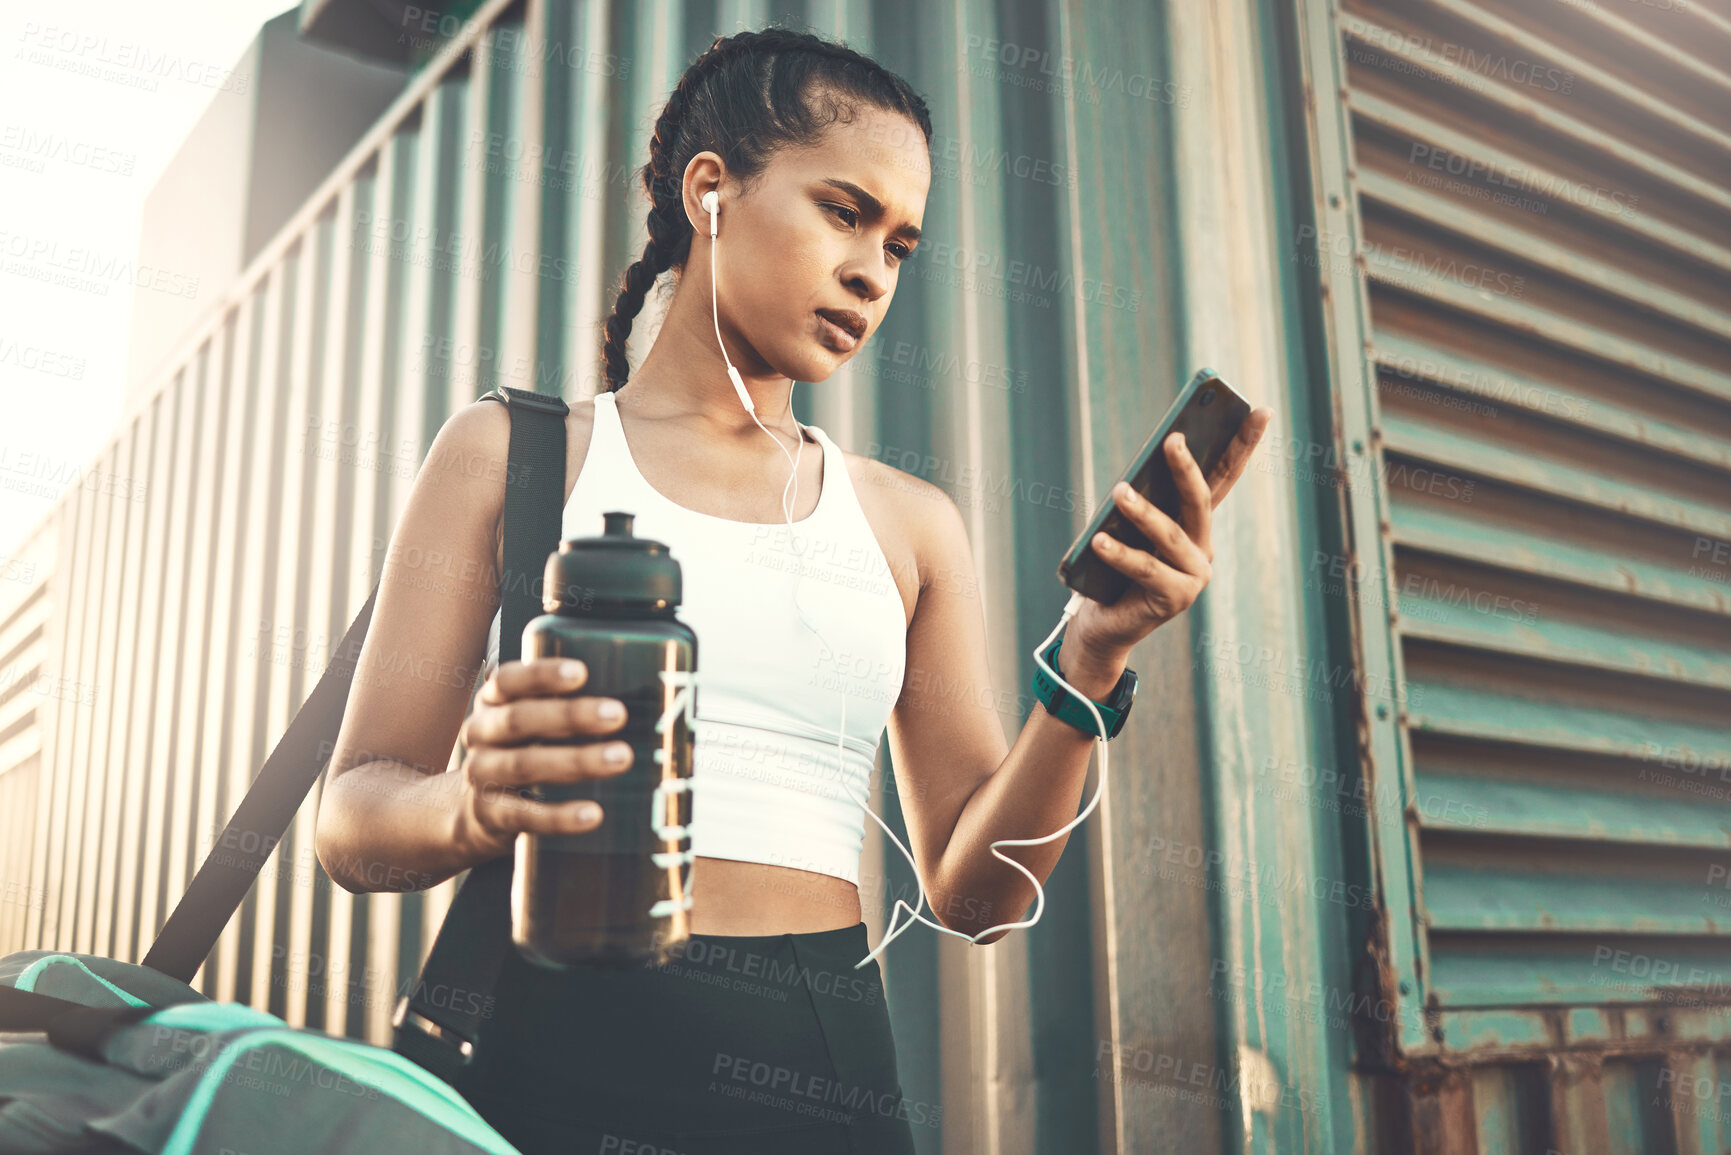 Buy stock photo Earphones, mobile app or happy girl runner in city streaming music to start training, workout or exercise. Social media, bag or sports woman athlete listening to radio or fitness podcast to relax 